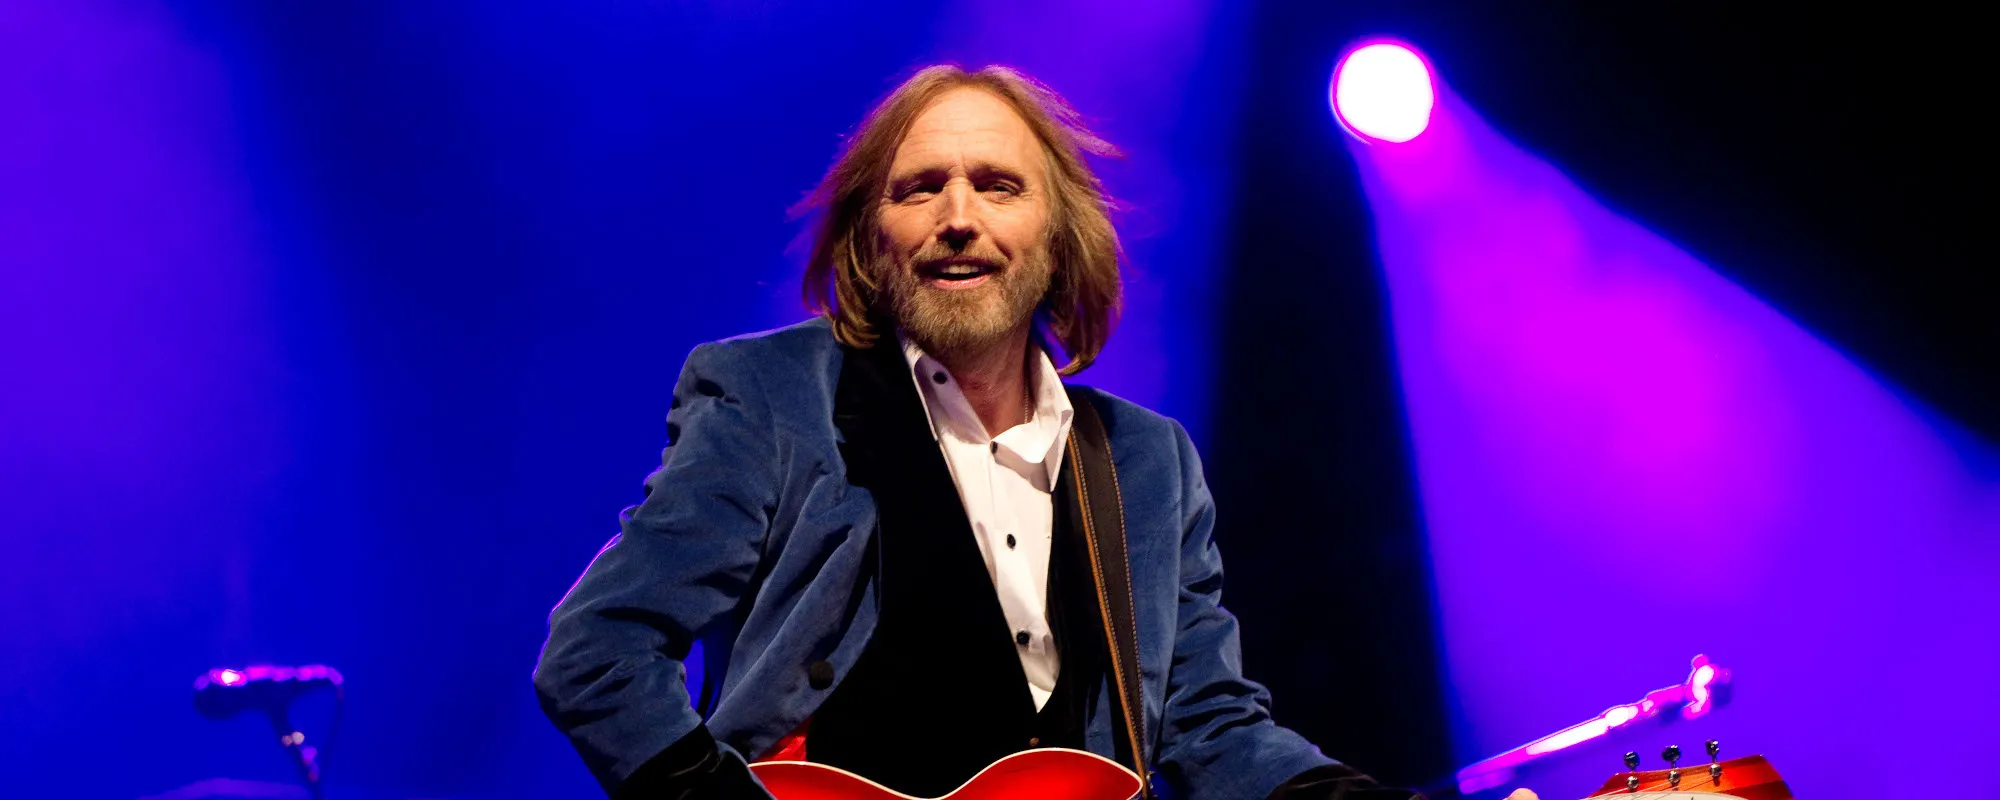 3 Songs You Didn’t Know Sampled Tom Petty—Including Sam Smith and Lana Del Rey